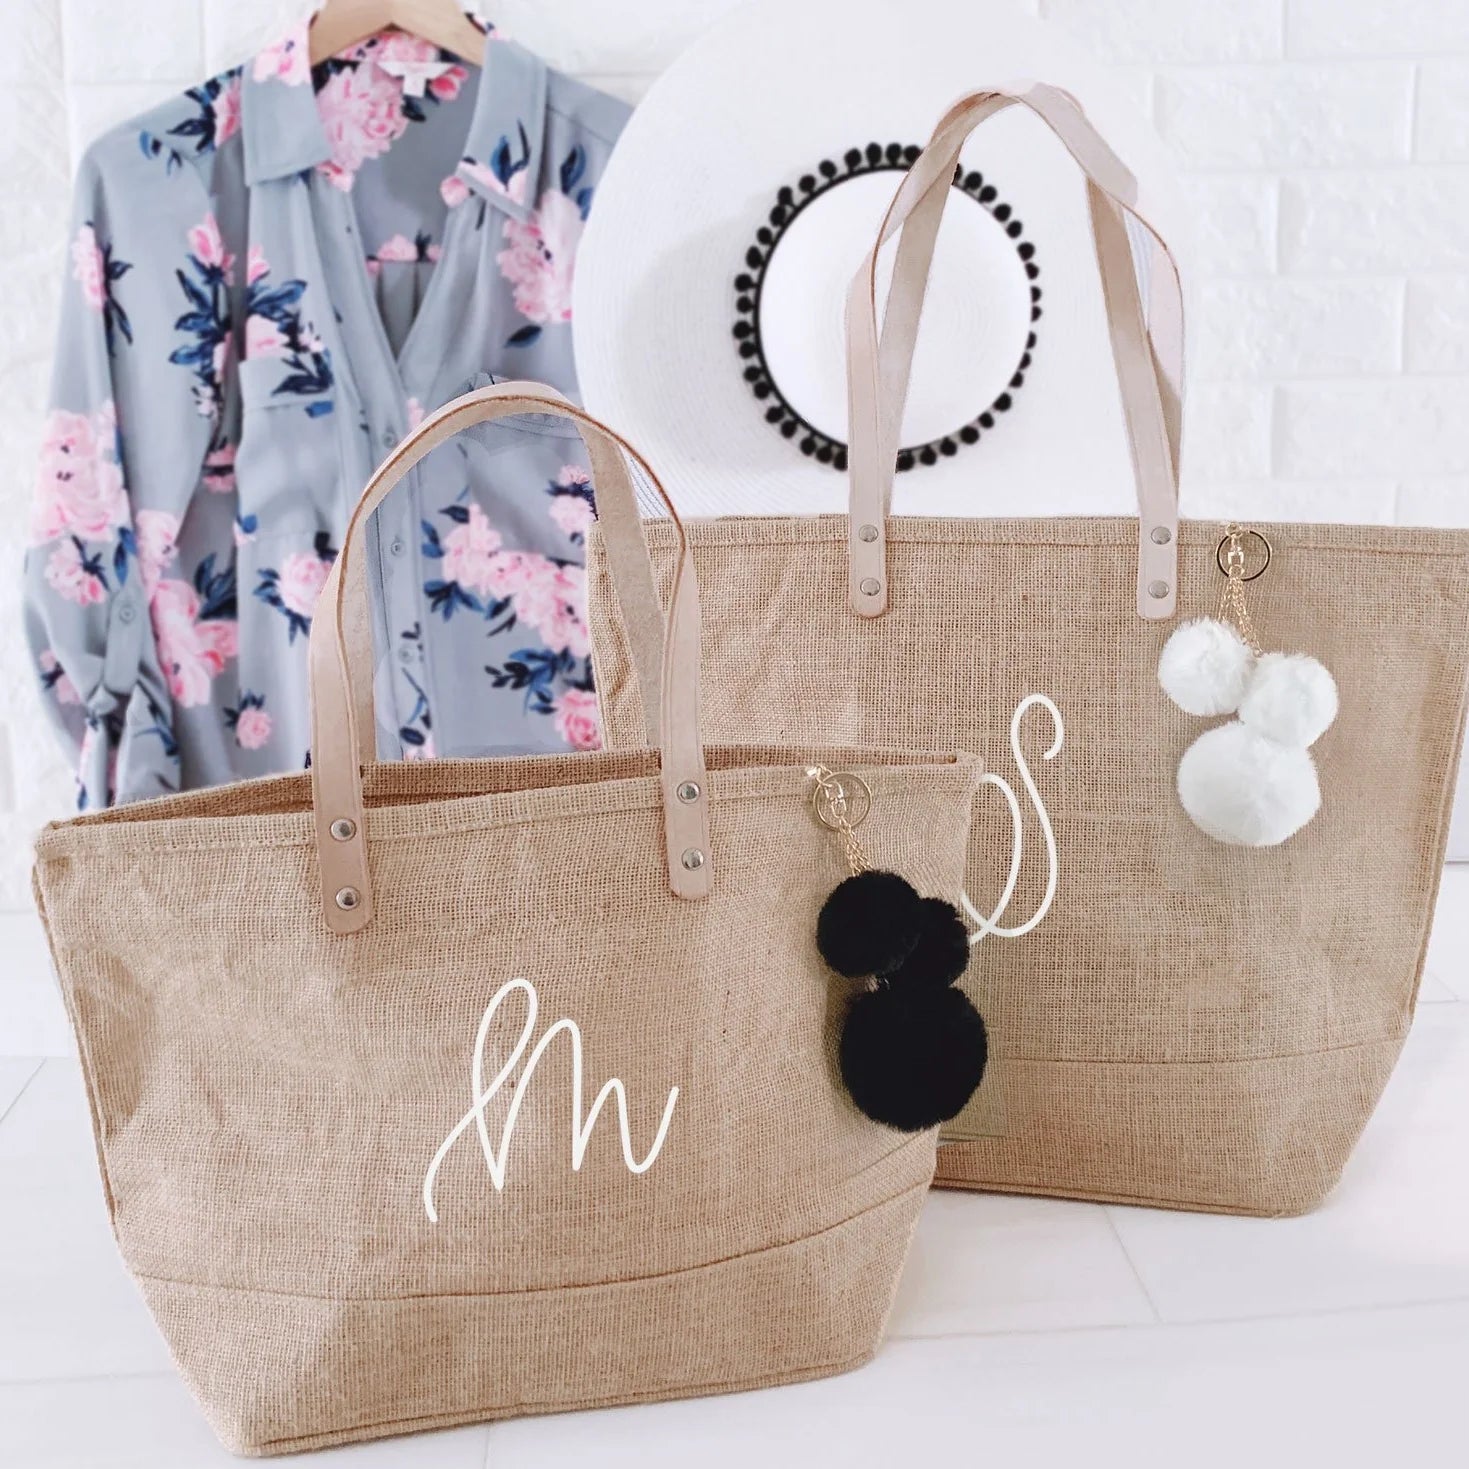 20 Tote Bags That Are Perfect For Your Summer Wedding